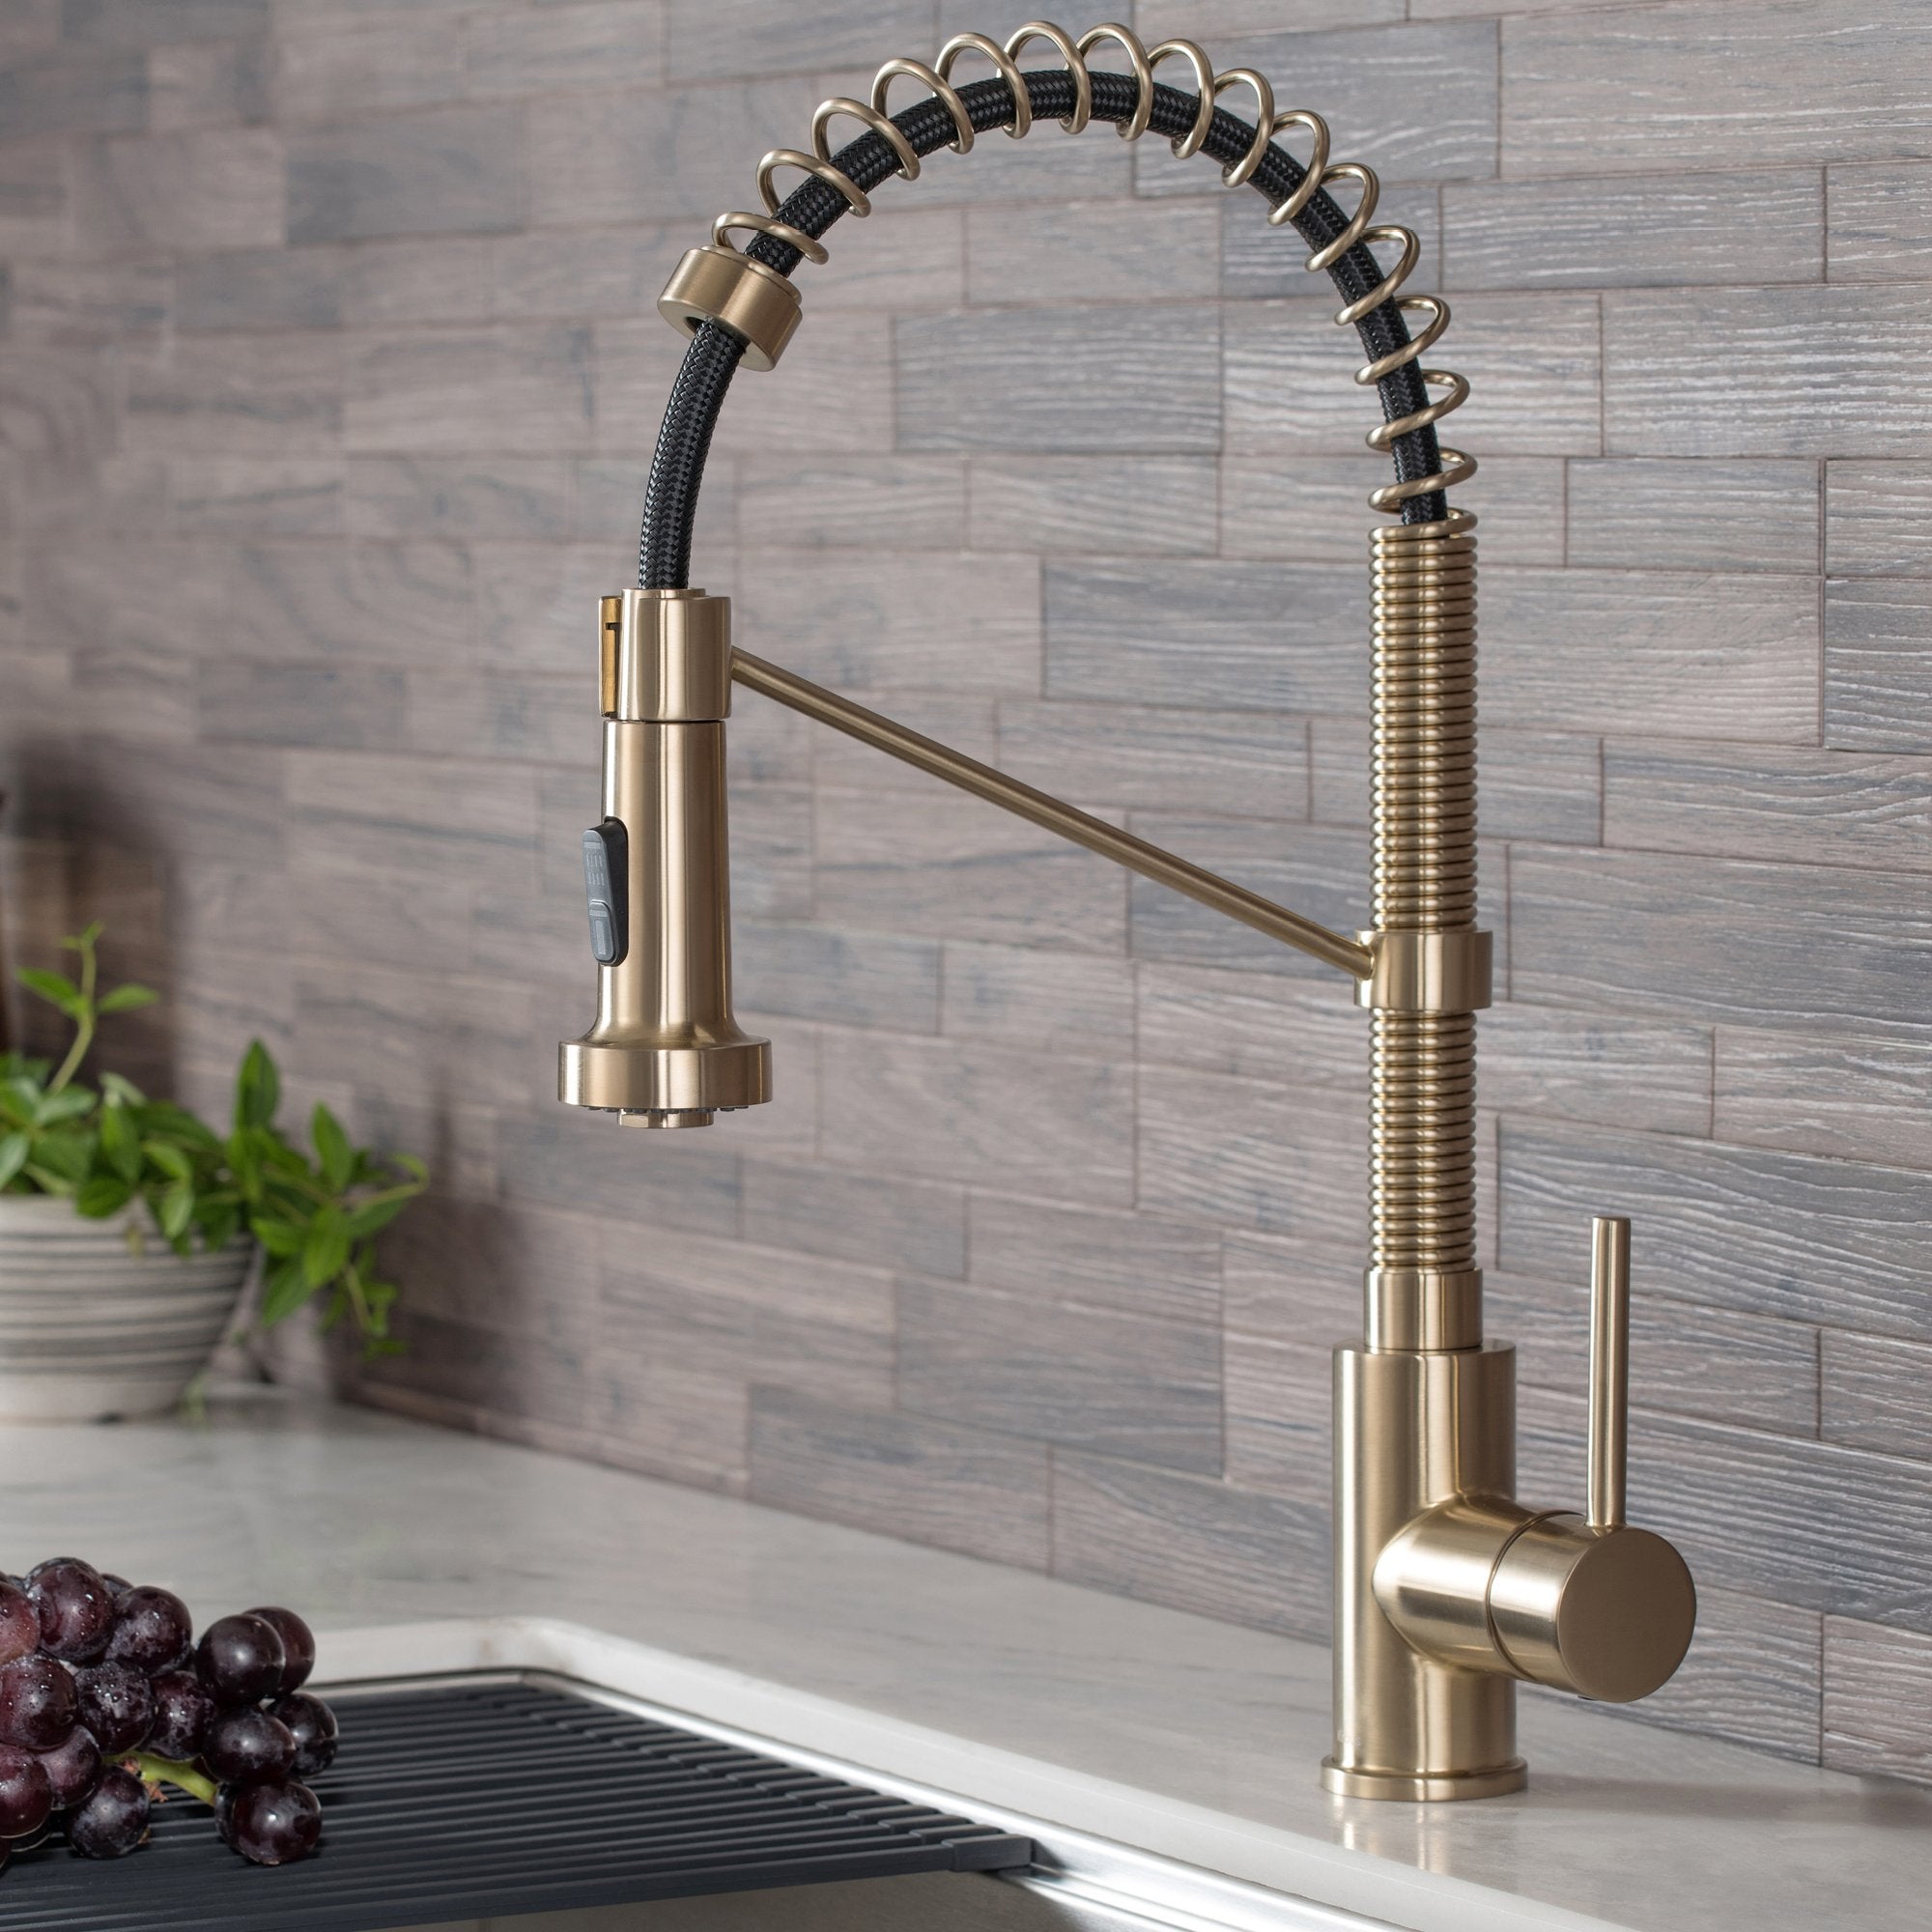 What are the Advantages of Gold Kitchen Faucets?